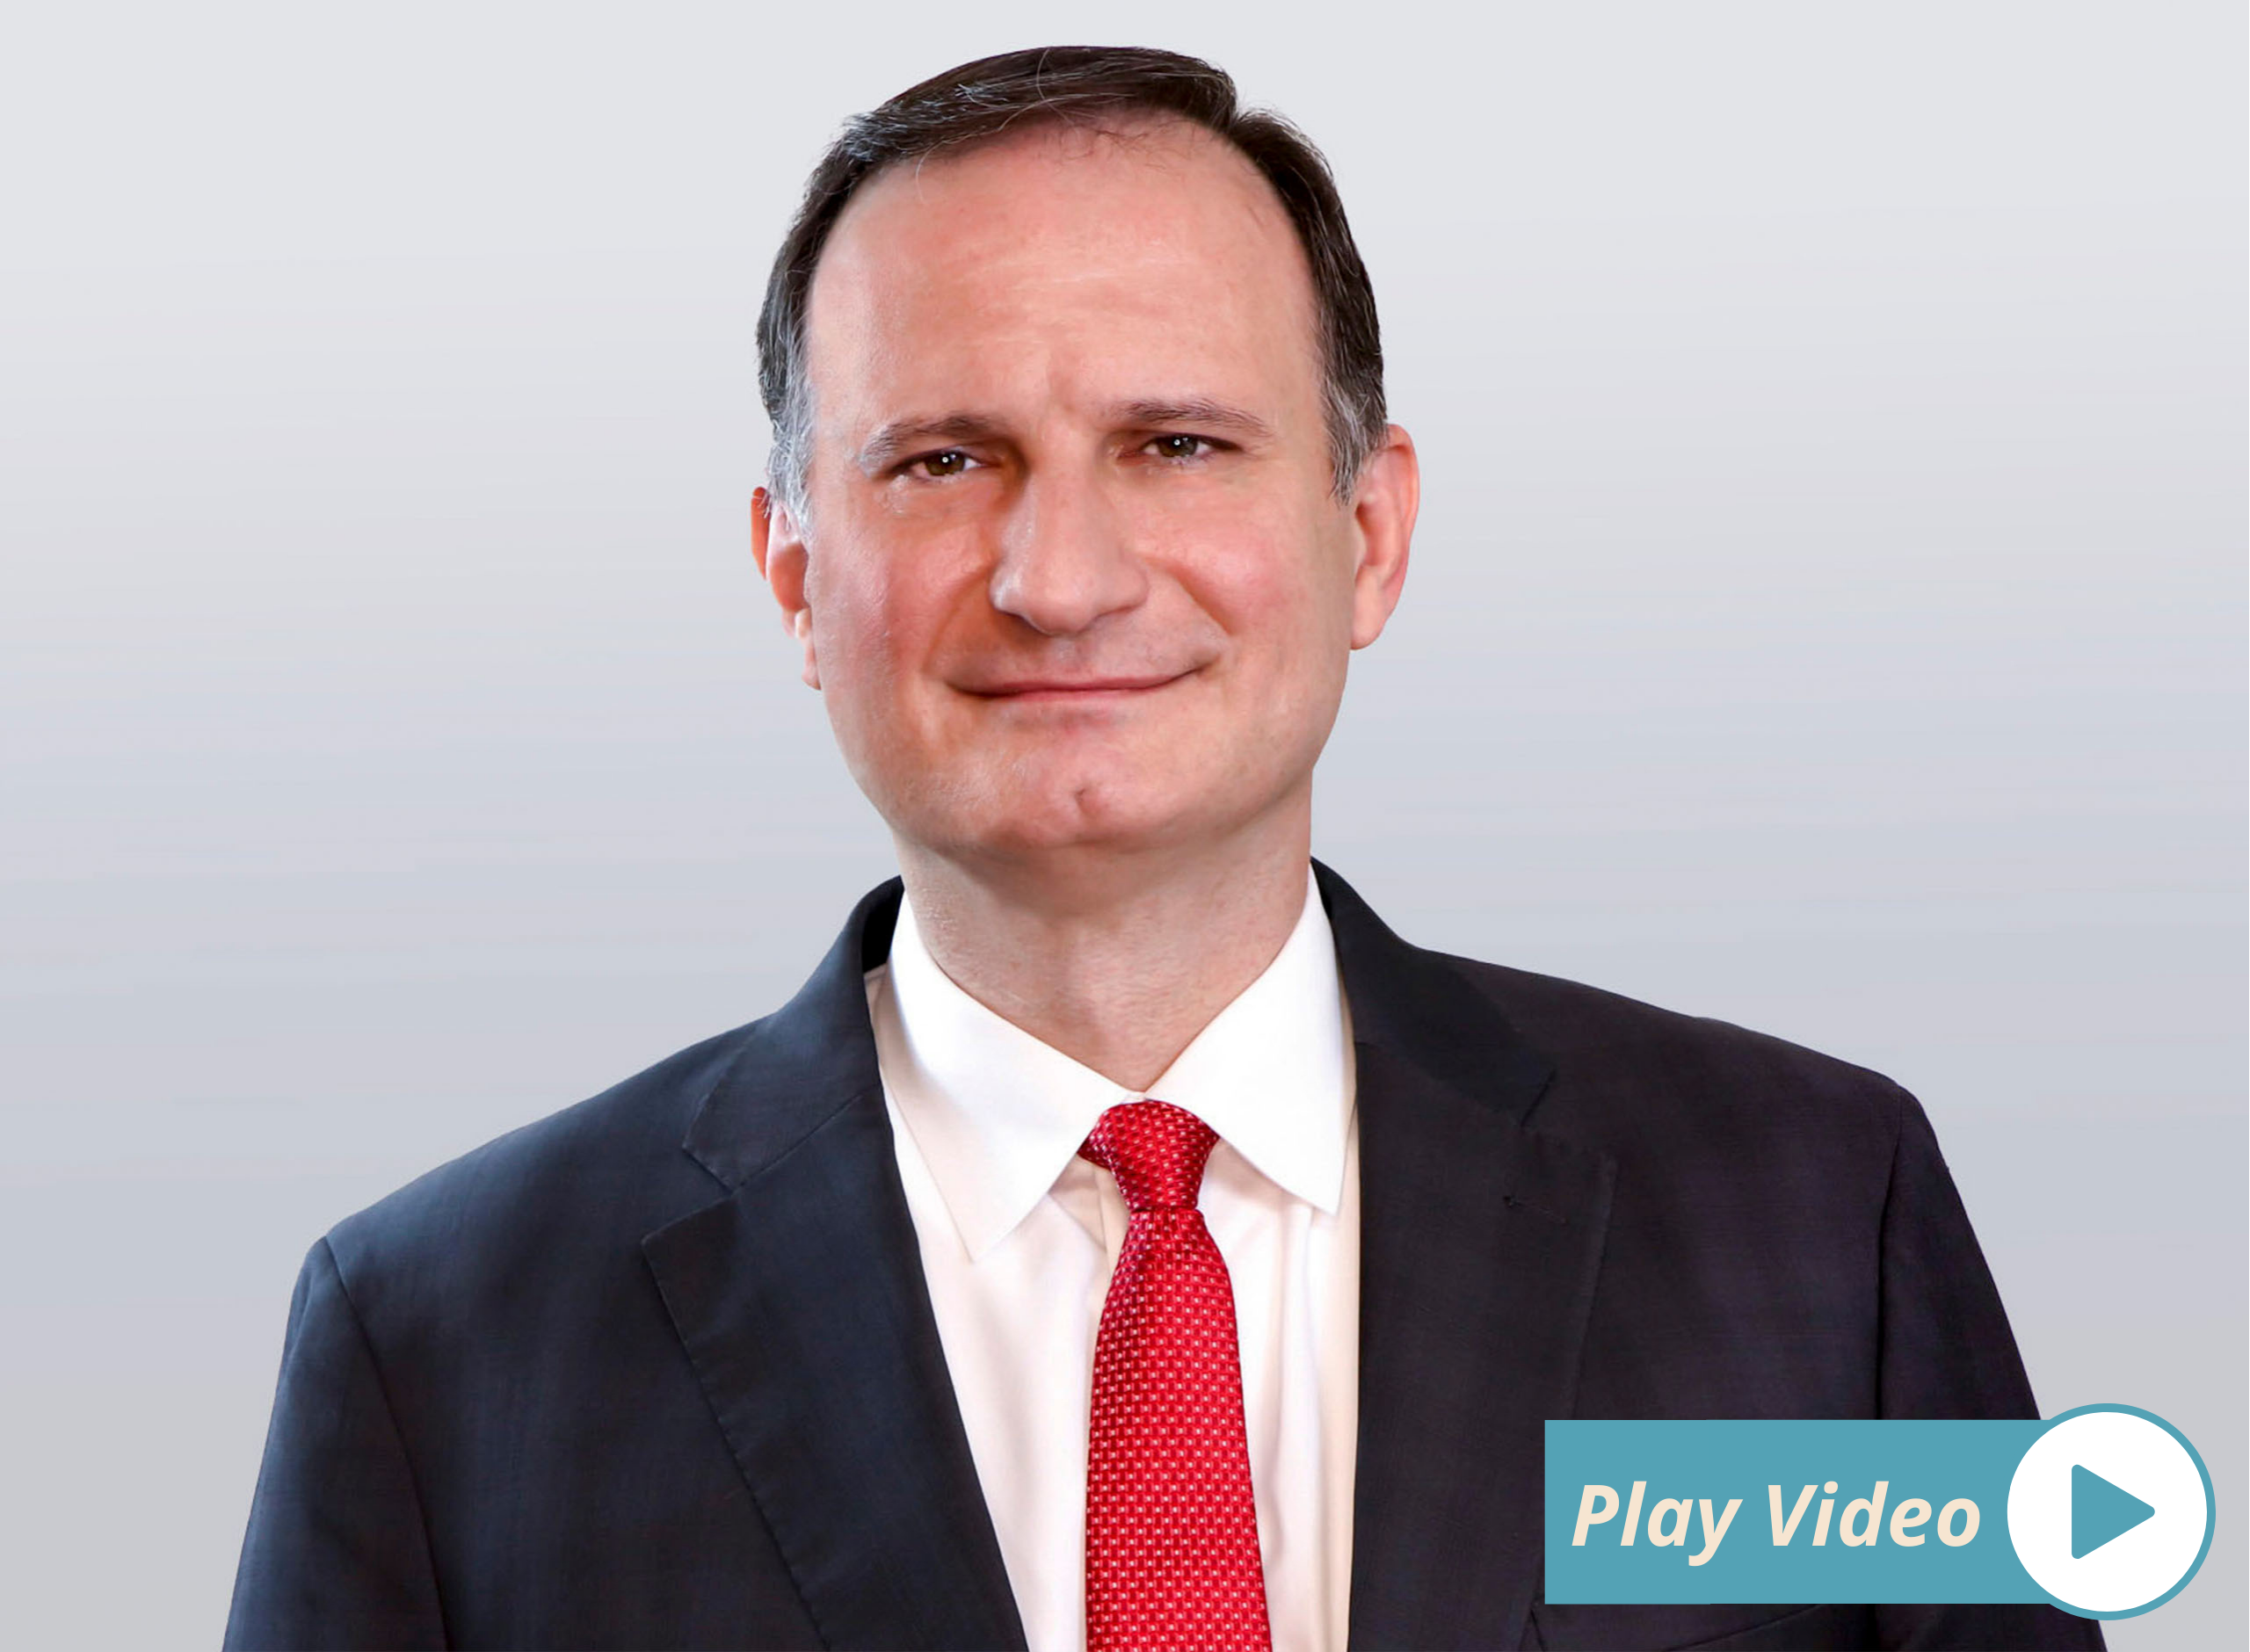 Robert Sati, Senior Vice President, Head of International Division. Click to play a video introduction.